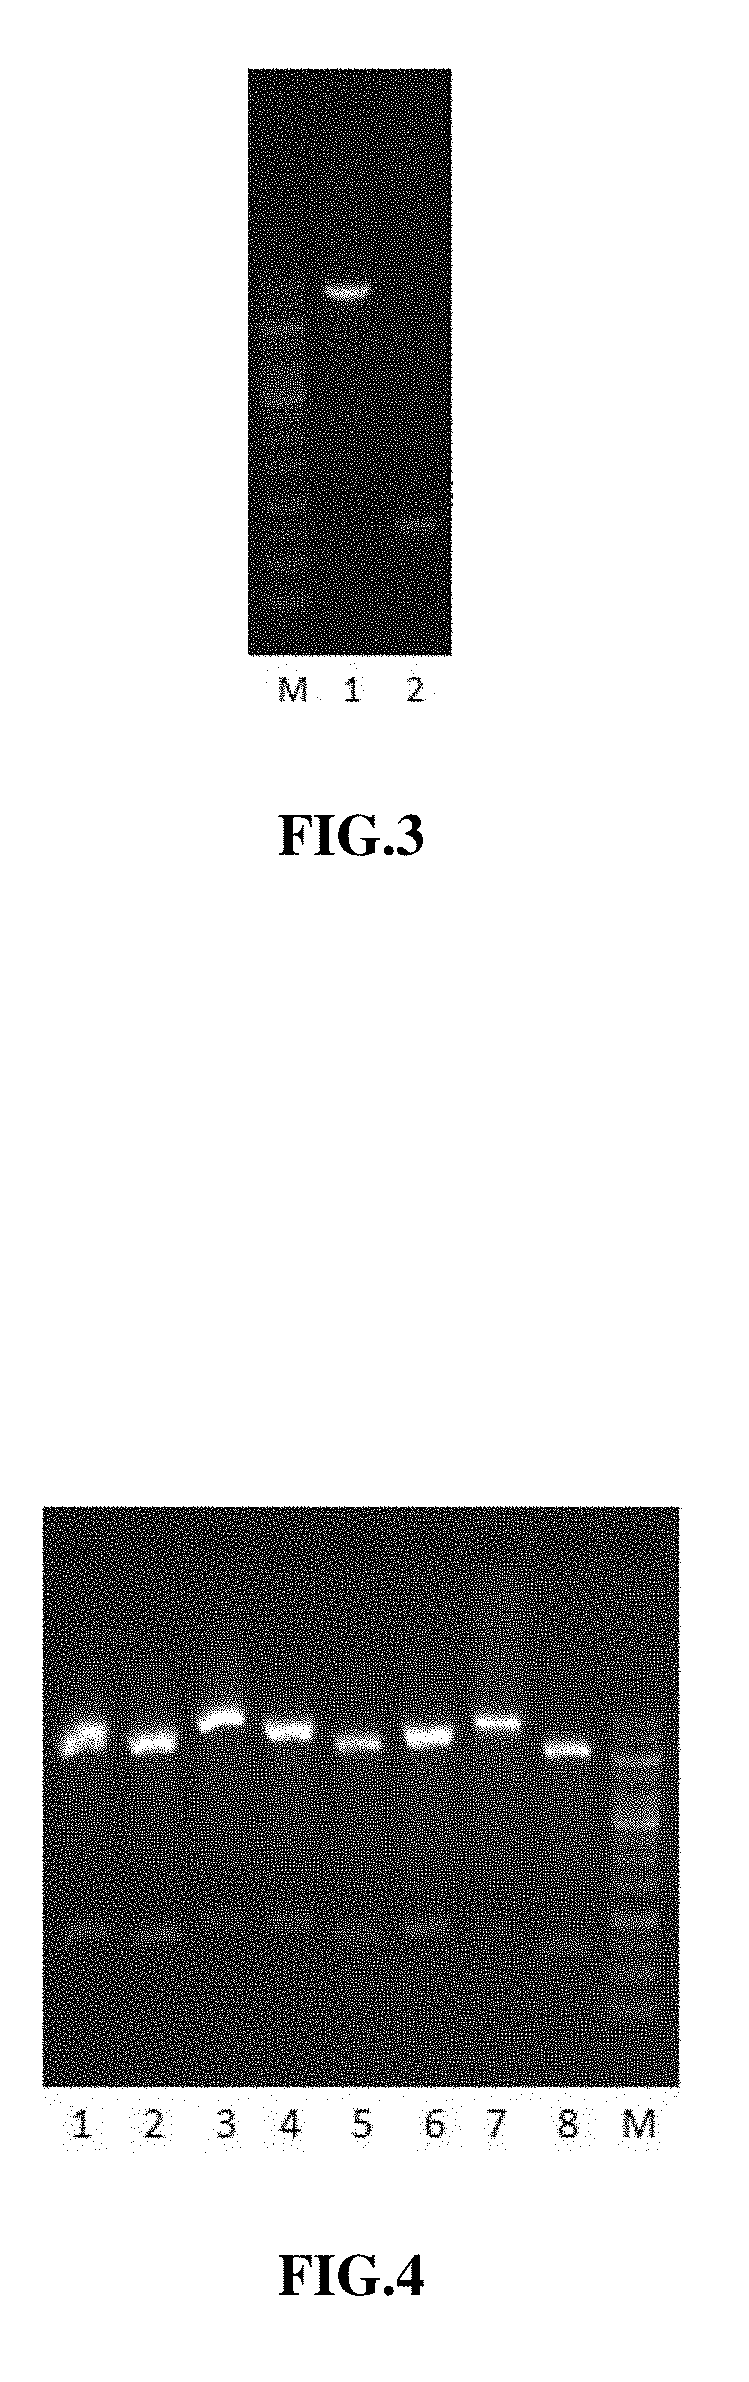 Bi-targeted Mutain MuR5S4TR of TRAIL and Preparation Method and Application Thereof